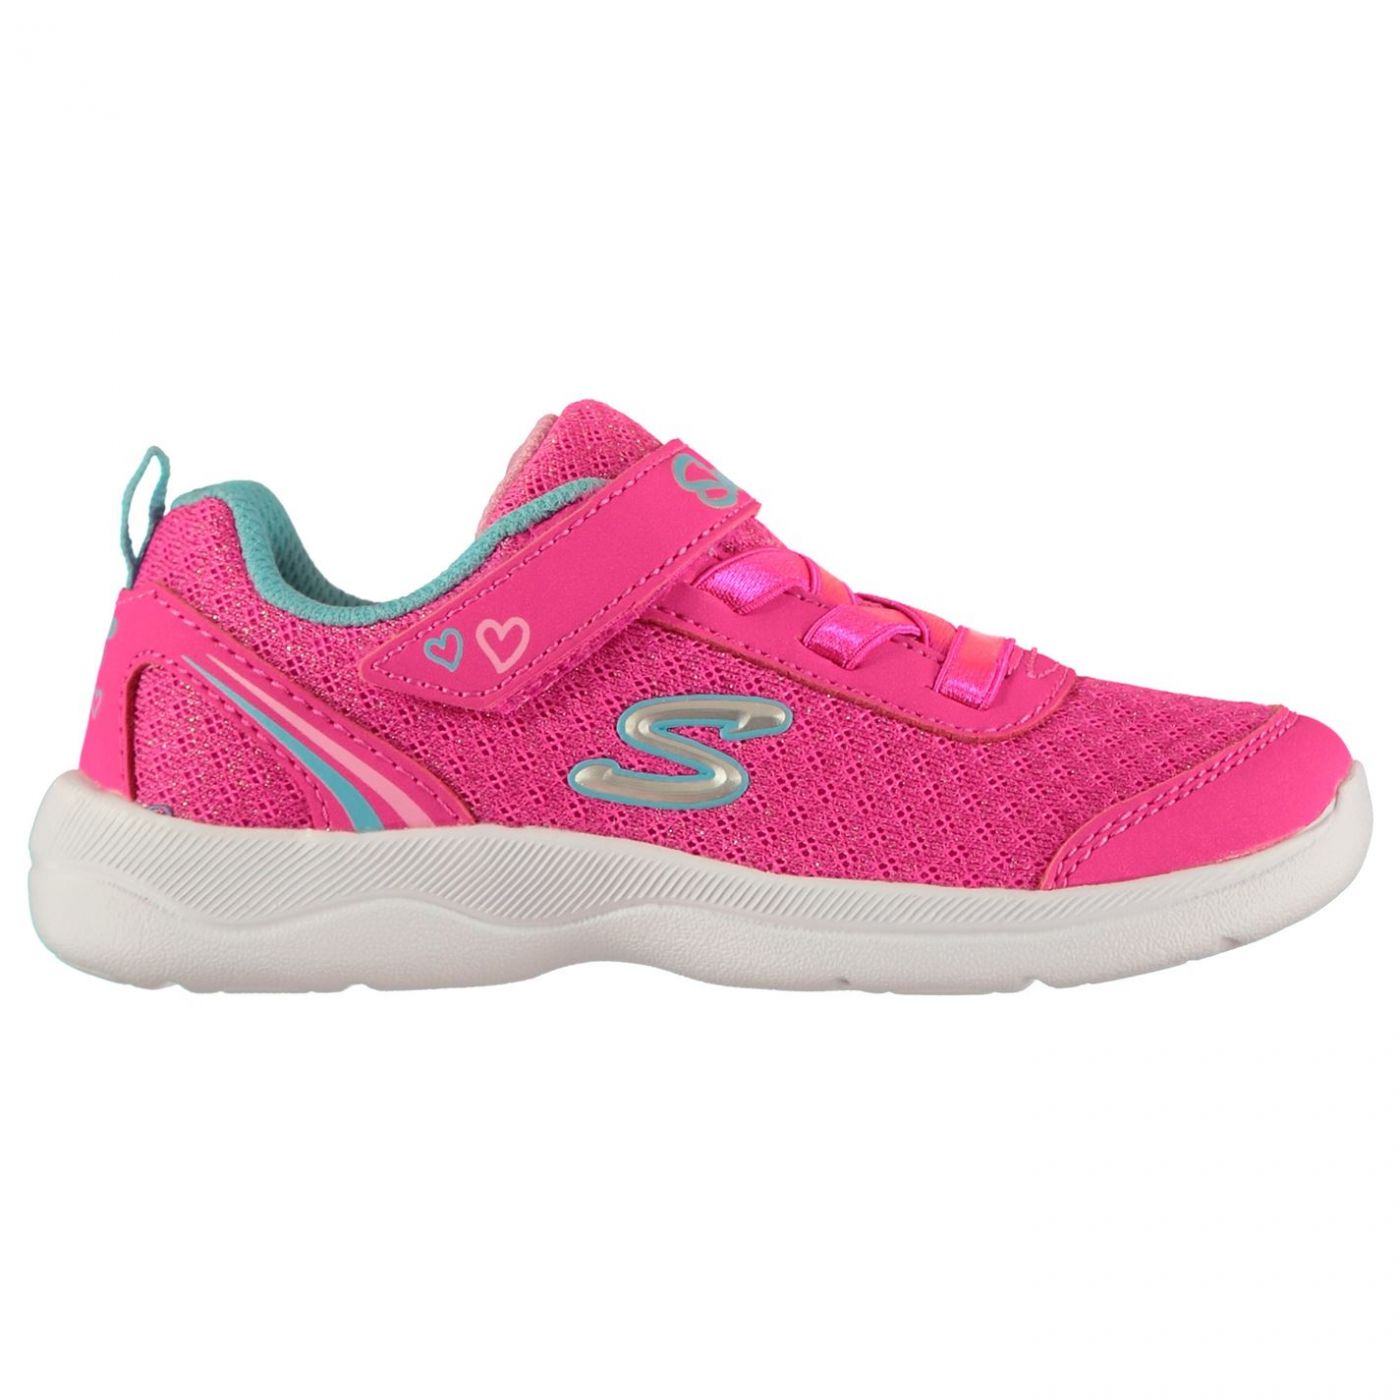 Skechers Sparkle 2 Trainers Infant Girls